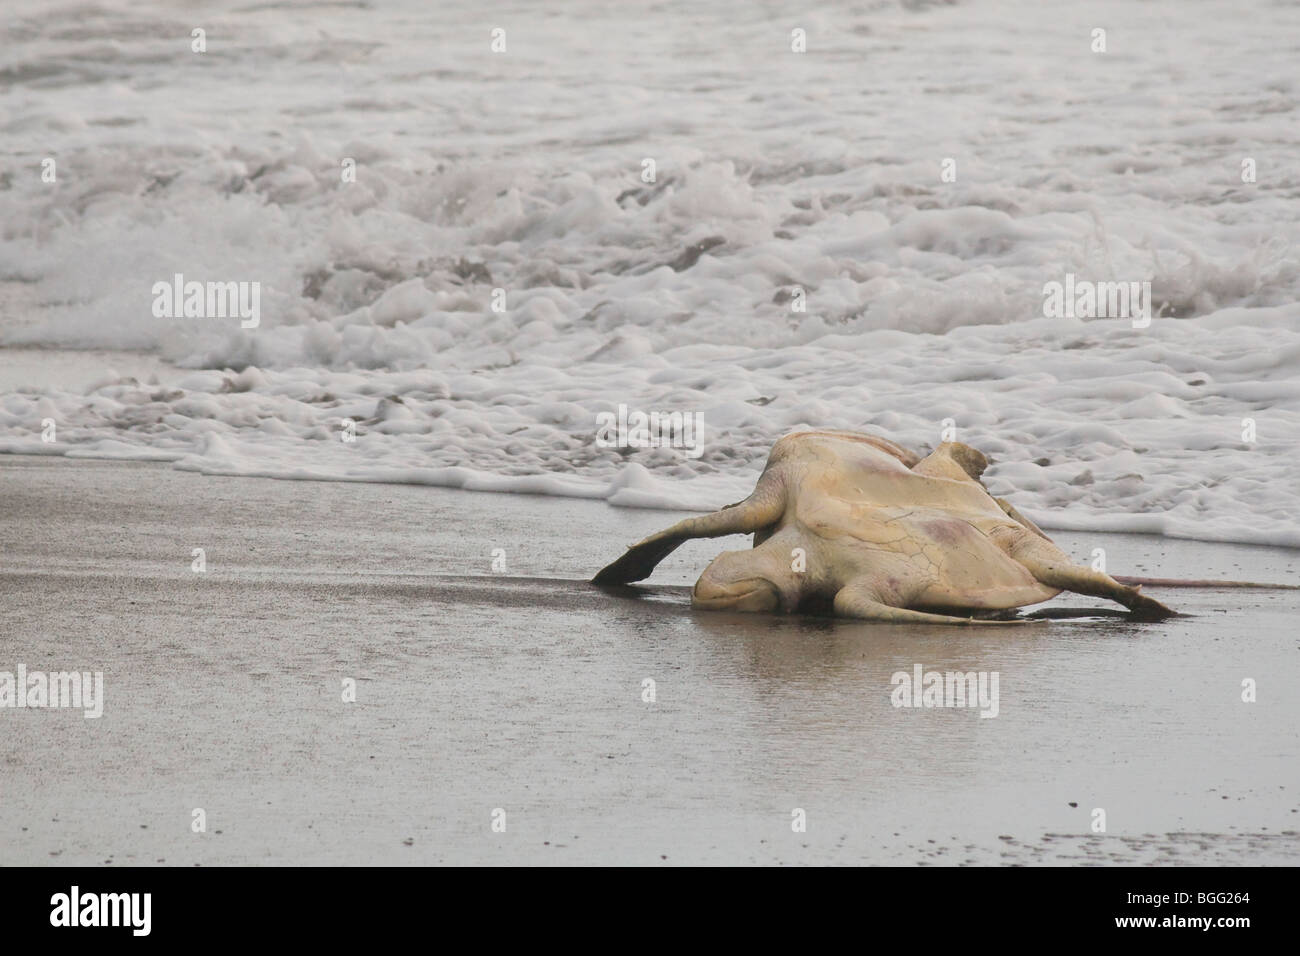 Dead Olive ridley sea turtles, Lepidochelys olivacea (an endangered species), washed up on a beach in Costa Rica. Stock Photo